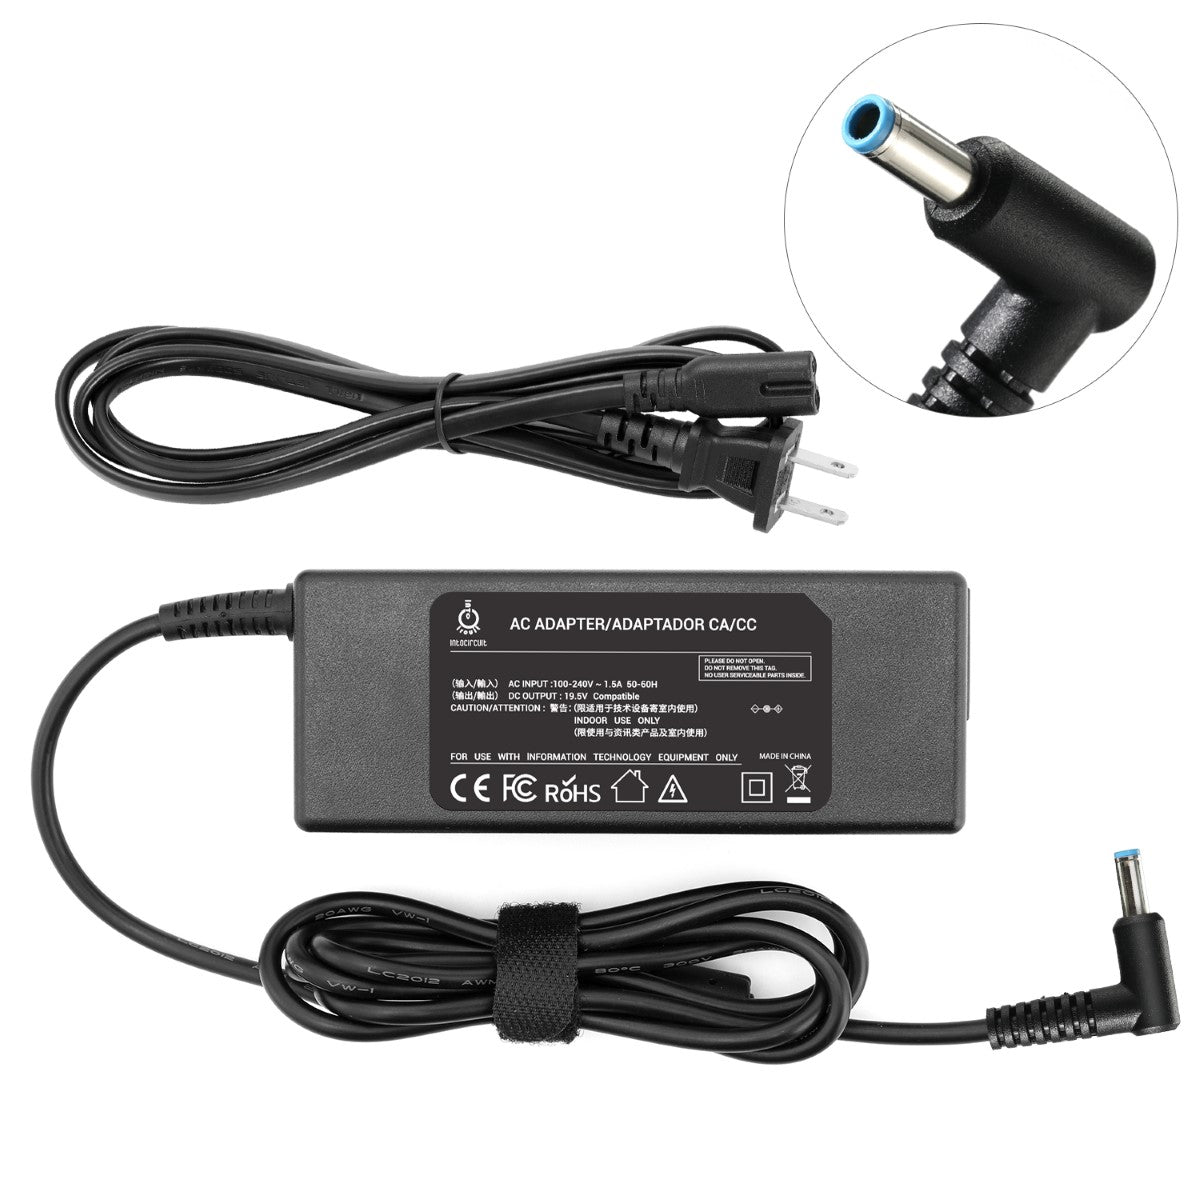 AC Adapter Charger for HP X360 Spectre 13t Notebook